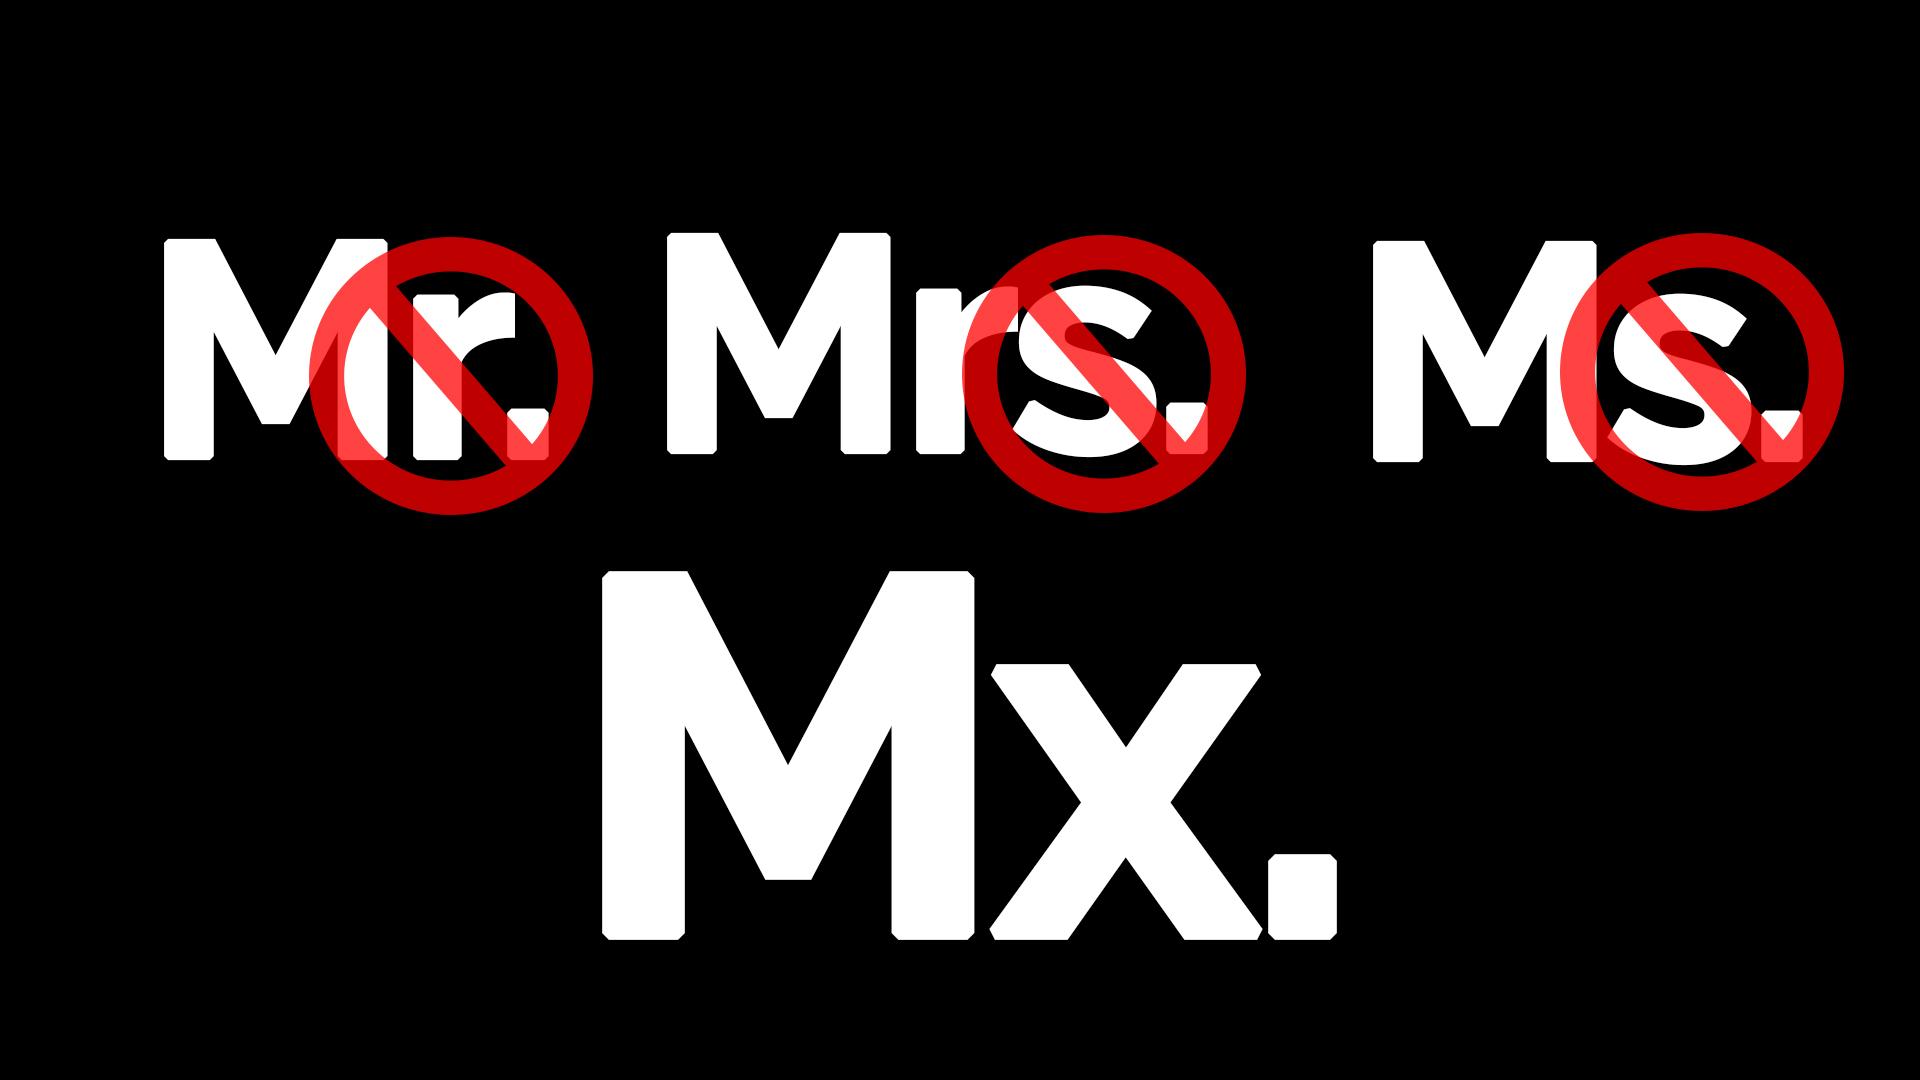 Mx. is an honorific growing in popularity